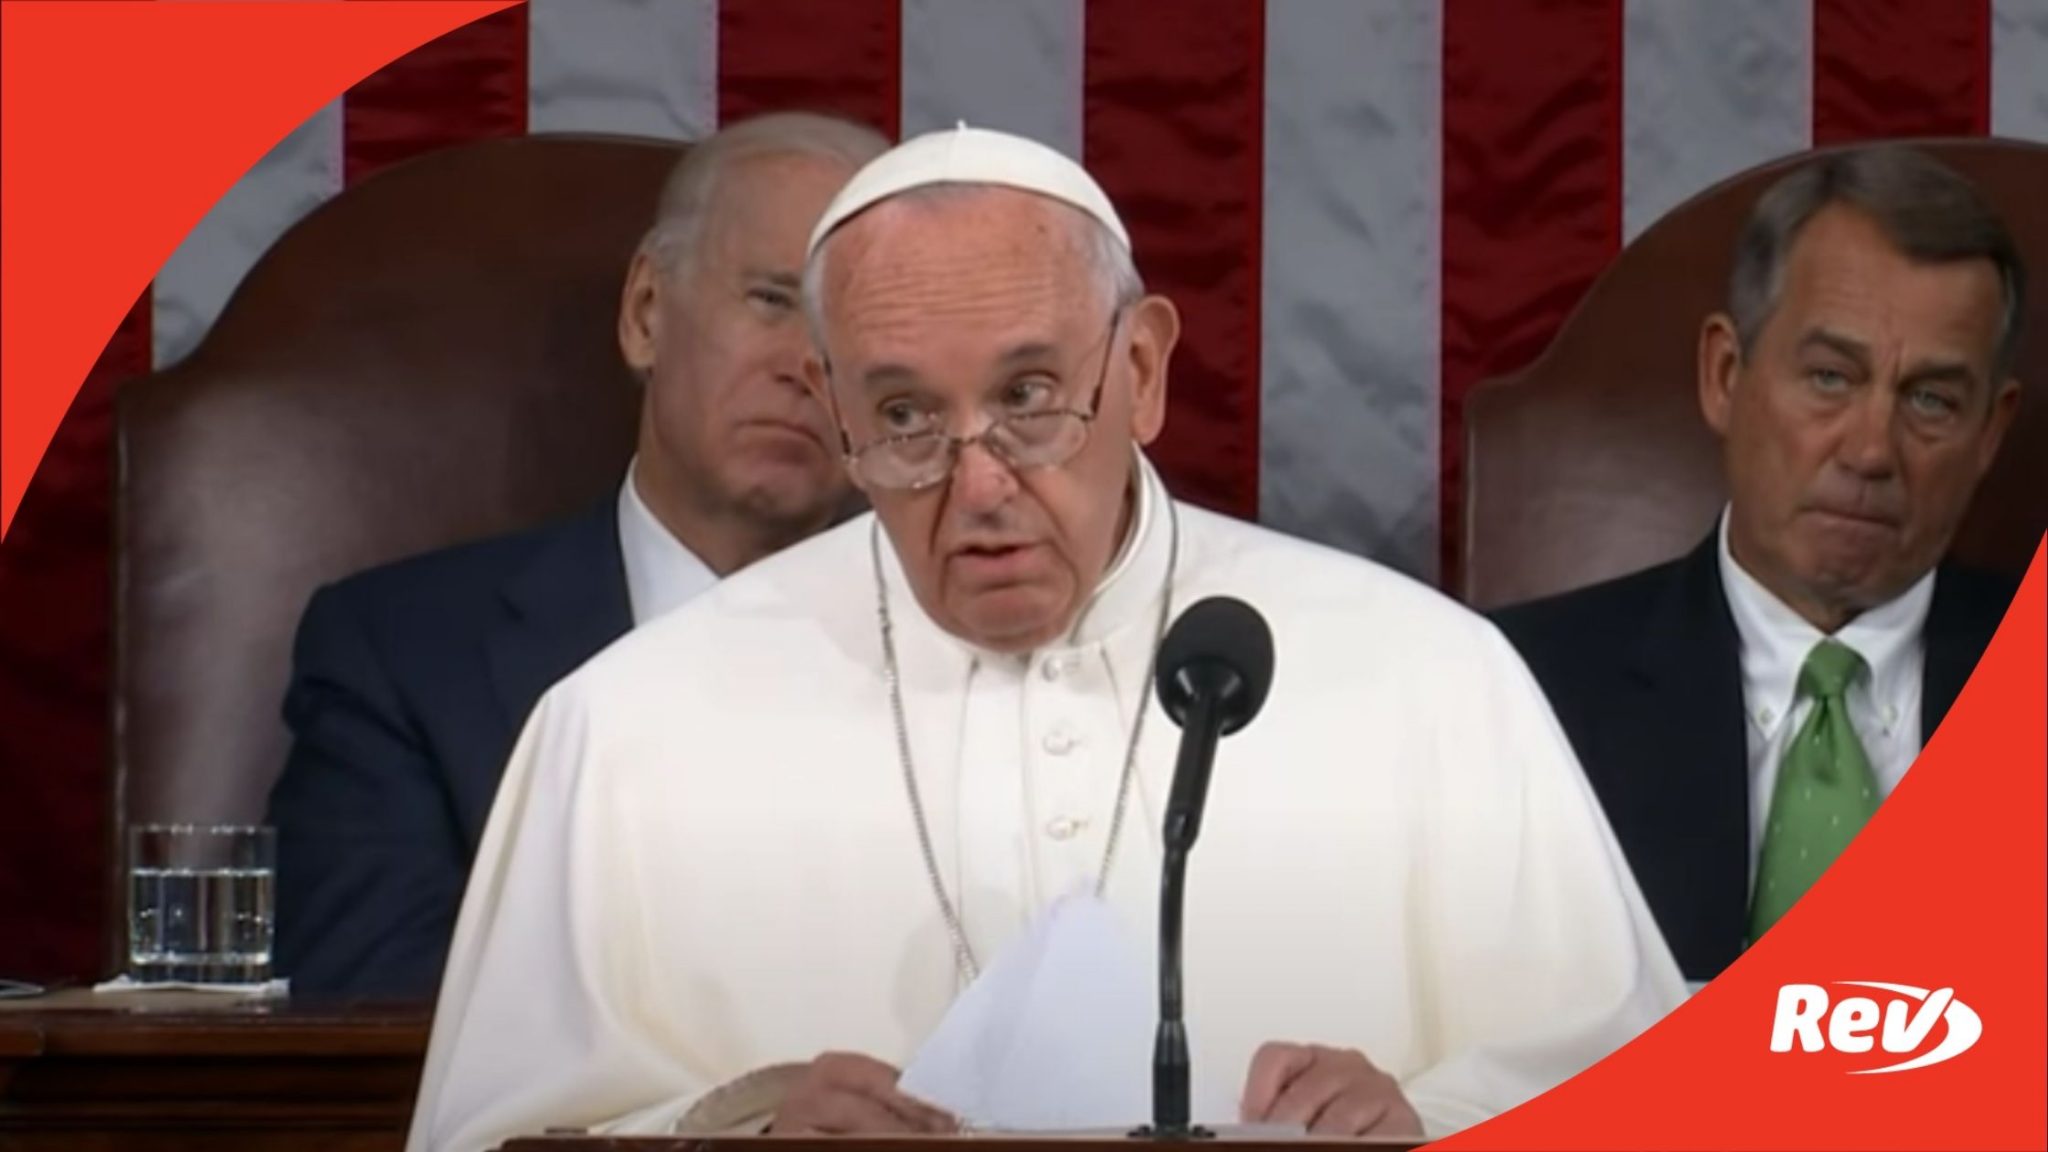 Pope Francis Speech to Joint Session of Congress Transcript